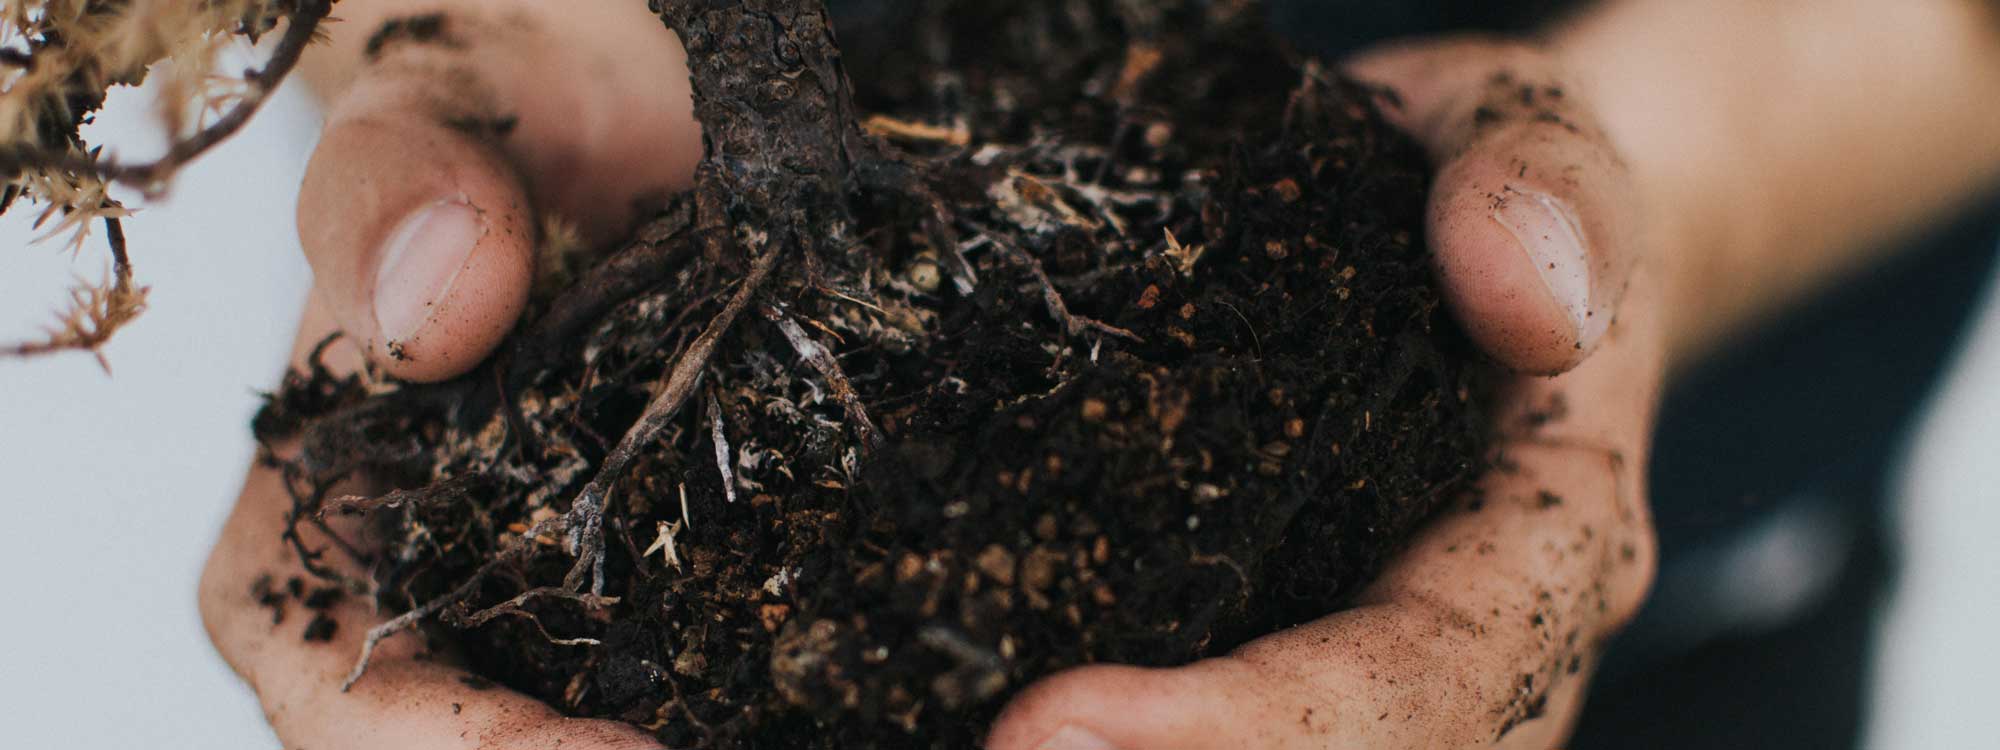 Leftover food scraps, fruit cores and vegetables parts can be put in the compost pile.